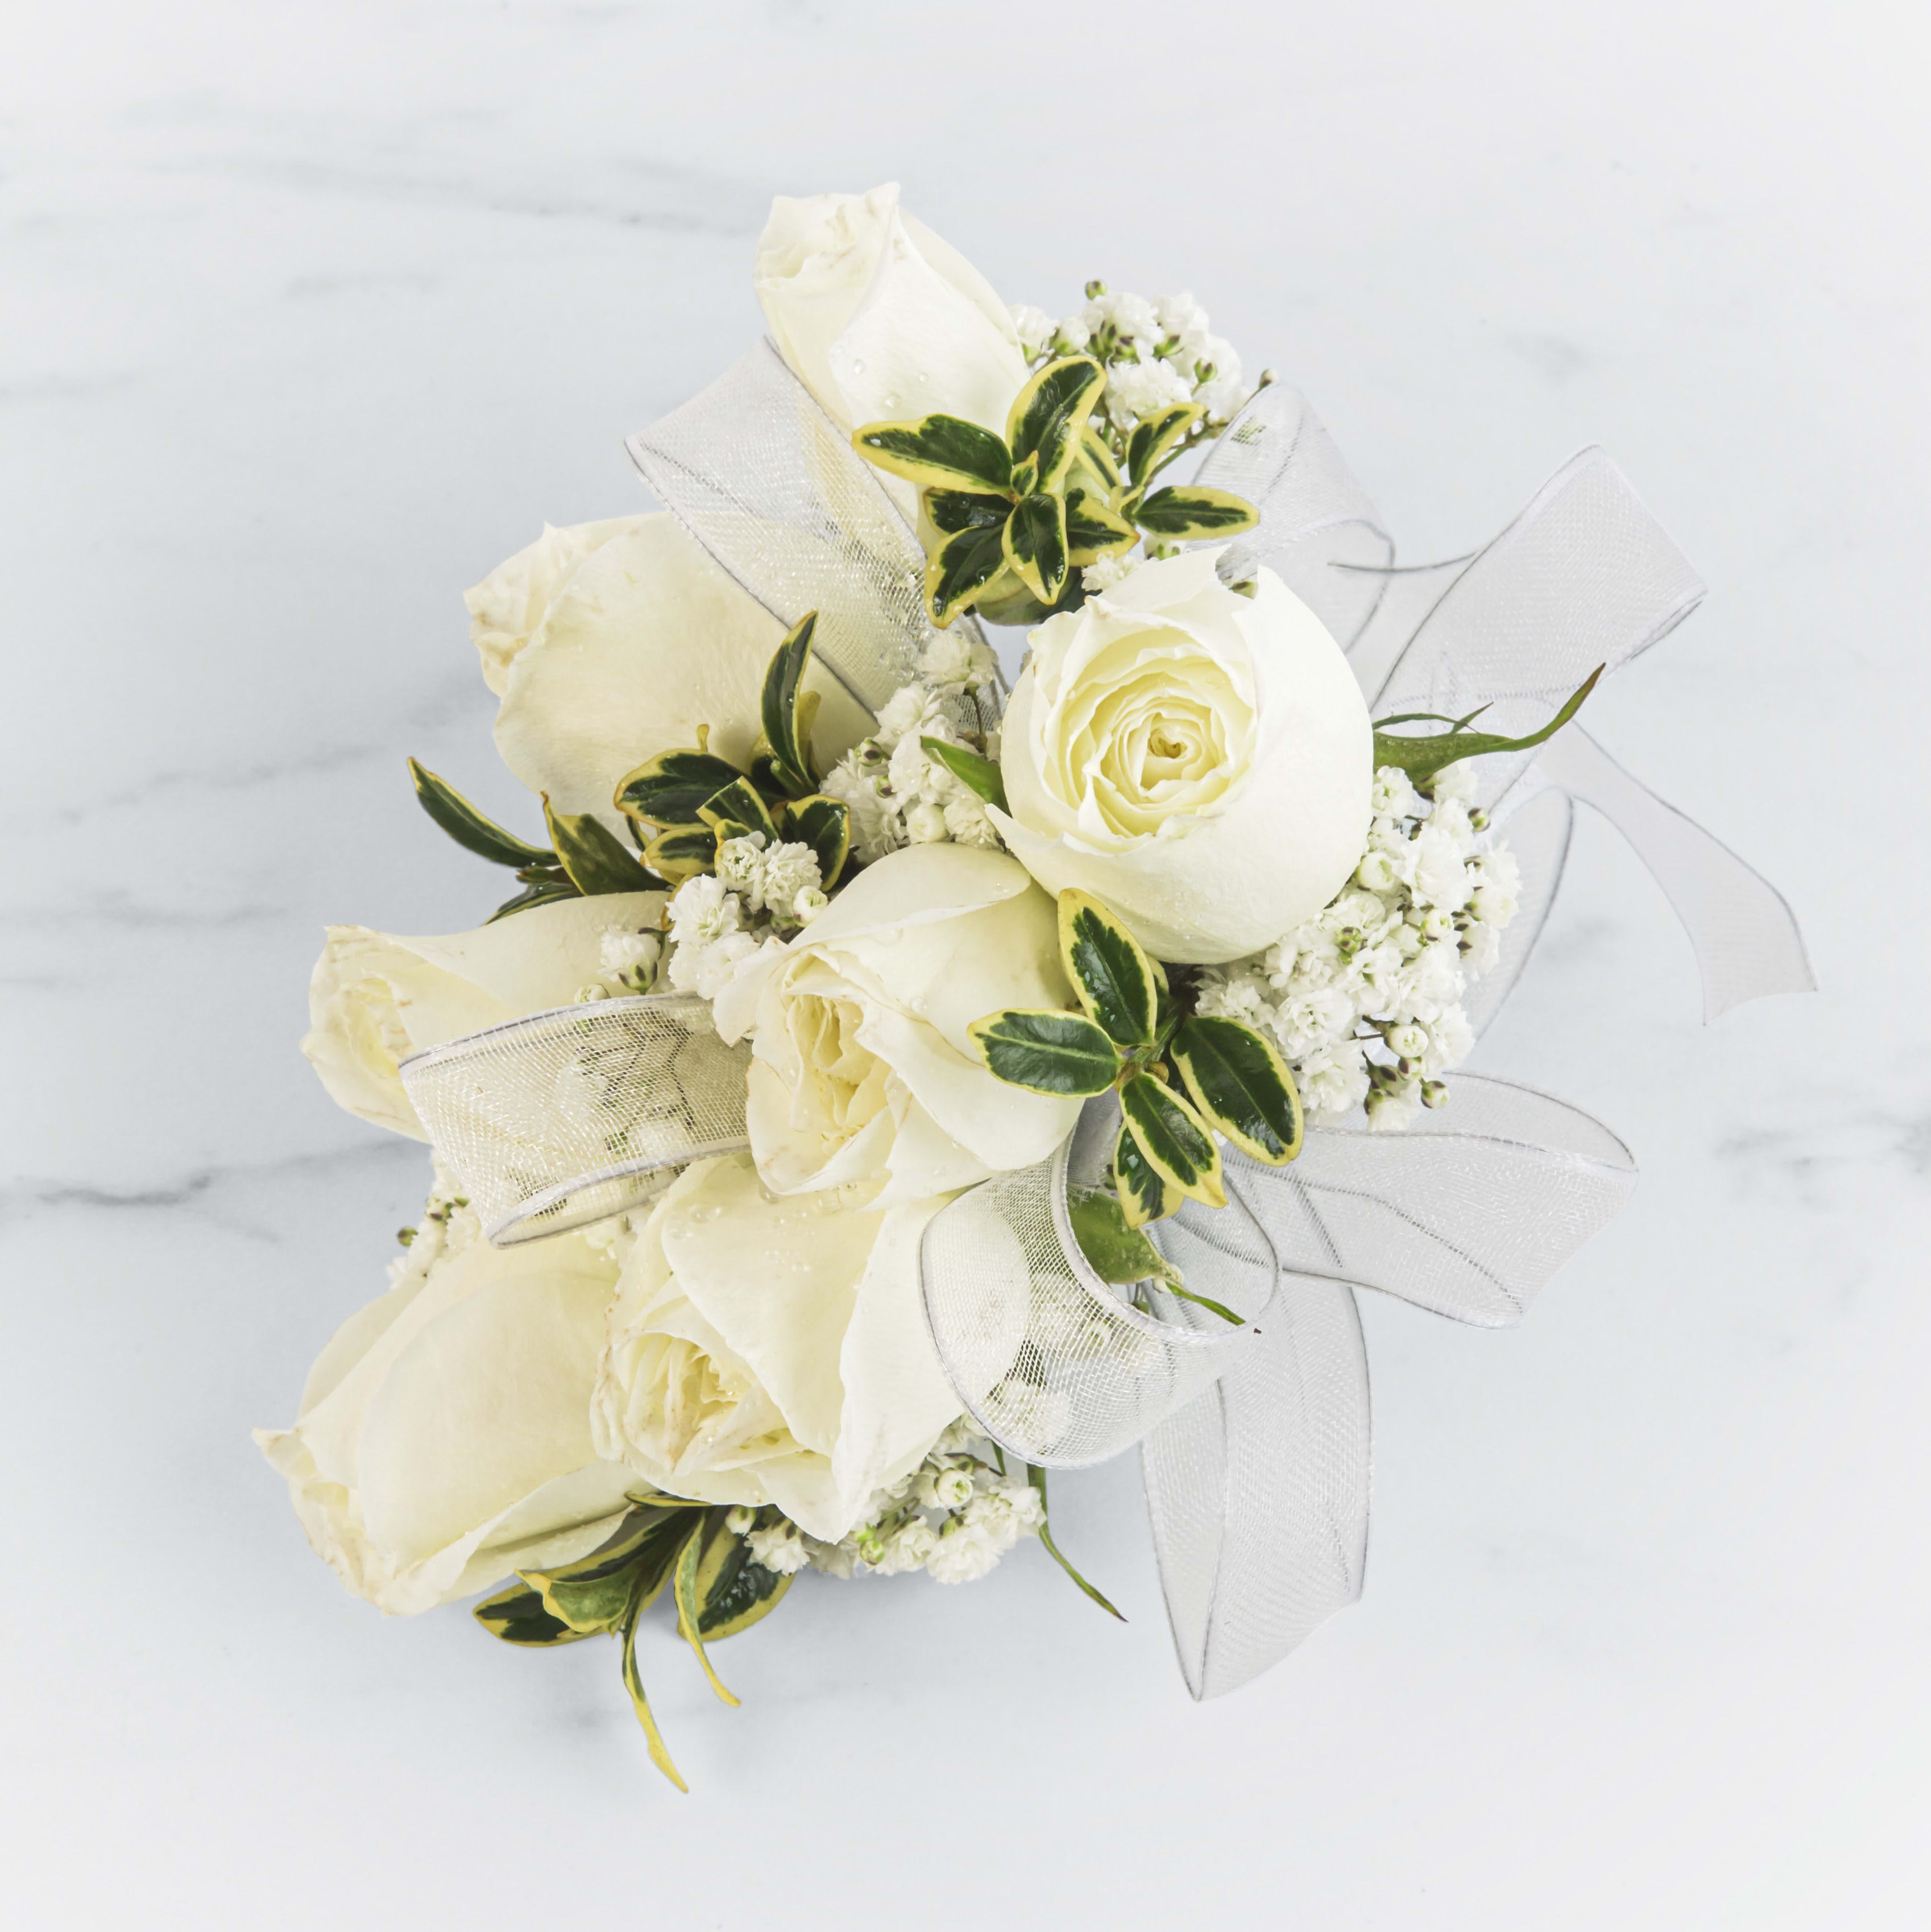 White Rose Corsage by BloomNation™  - A classic white corsage with silver sheer ribbon, this wrist arrangement looks good with any outfit. A perfect compliment to any prom, formal, or wedding event. 